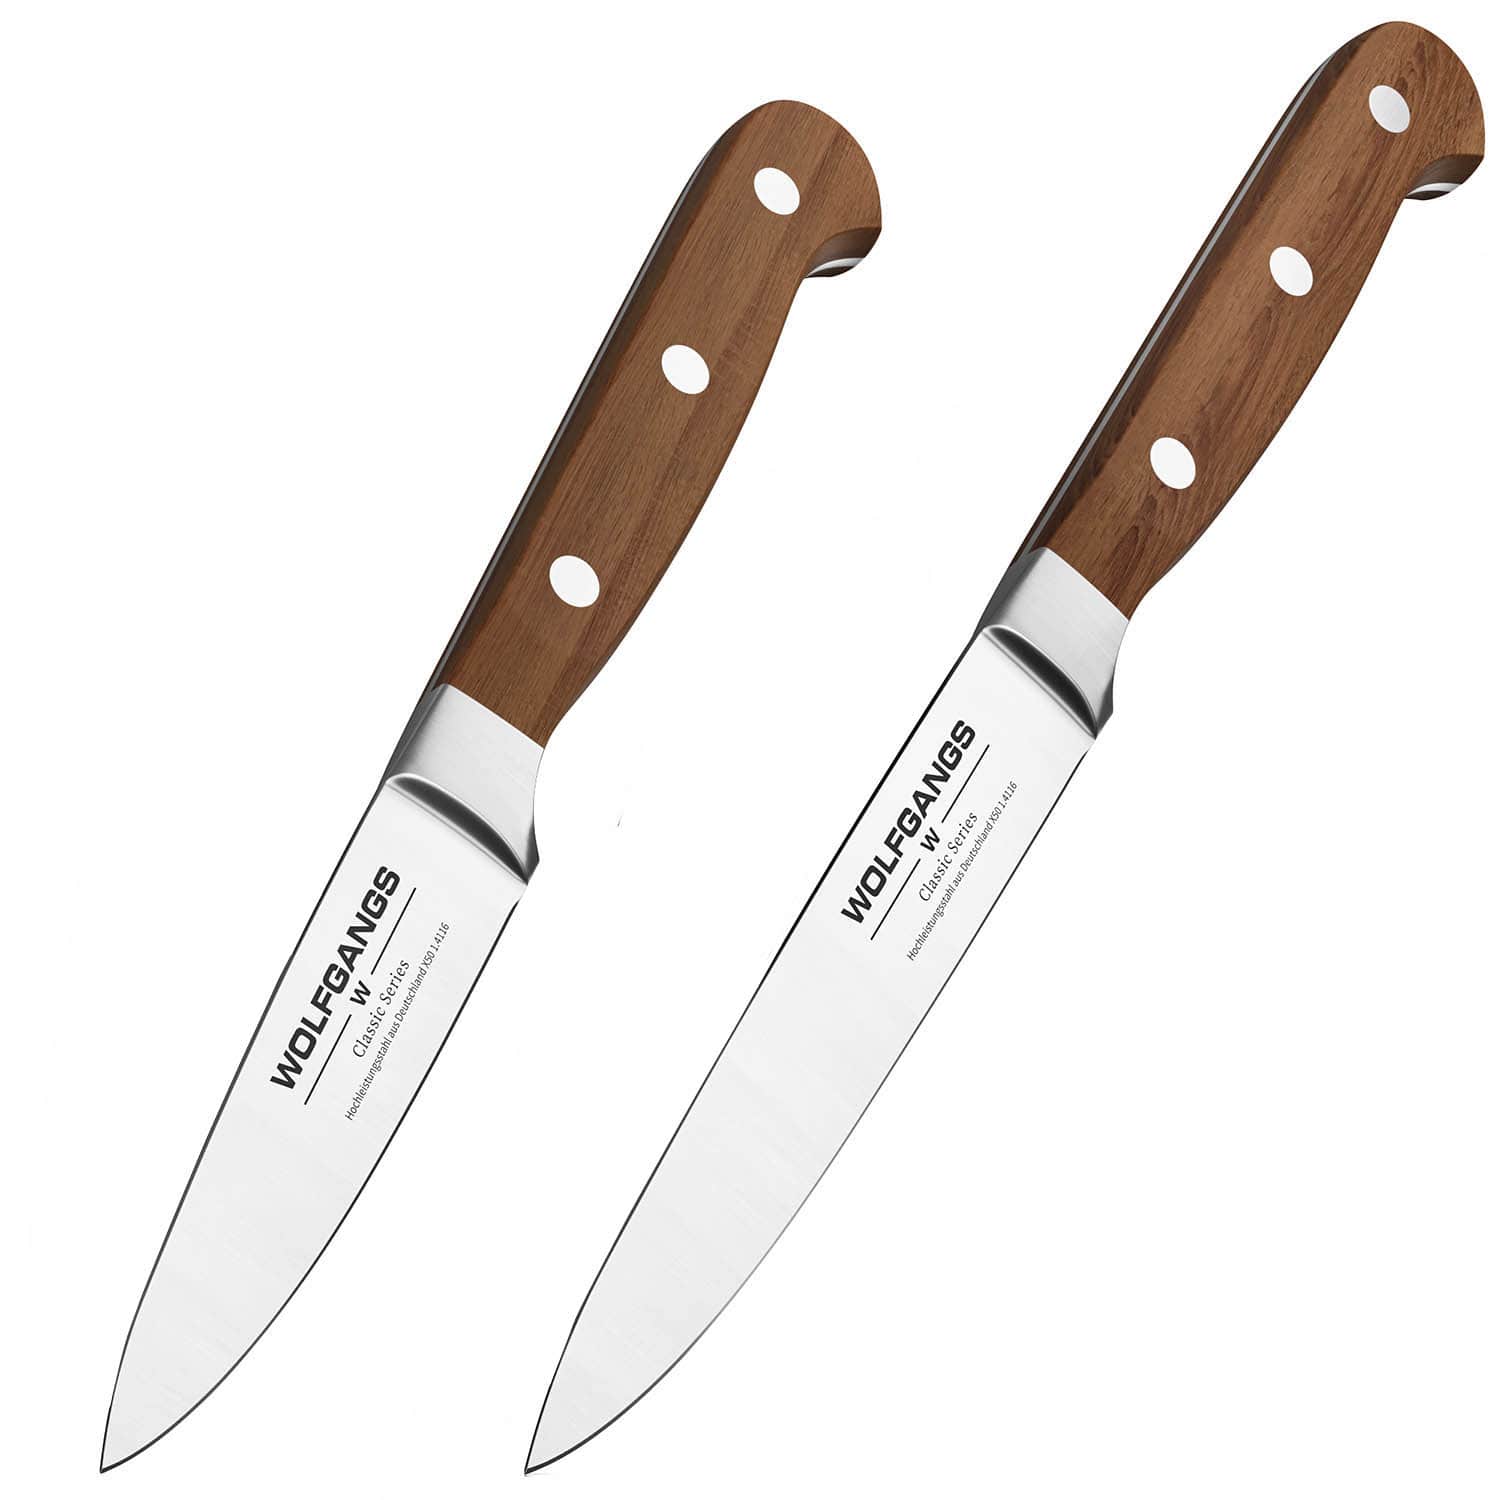 Picture of Odenwolf - Classic Walnut Paring Knife 2-Piece Set